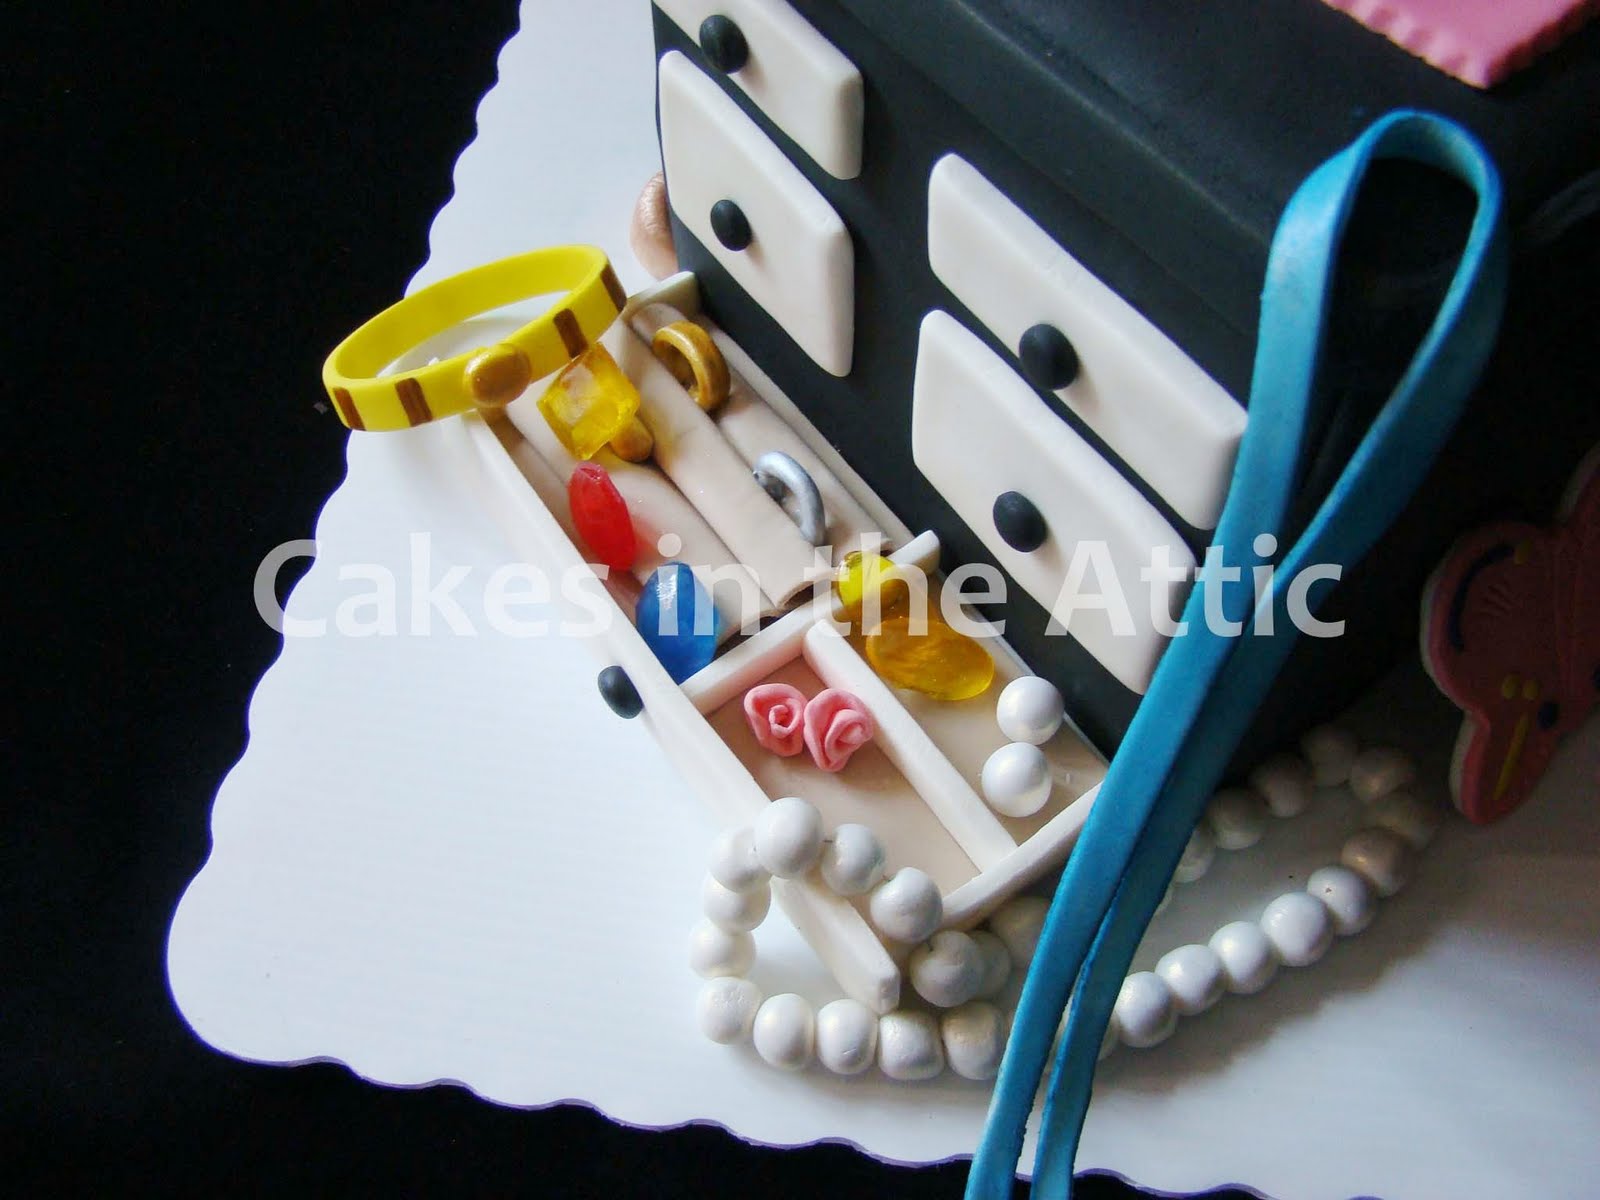 Jewelry+box+cake+pictures